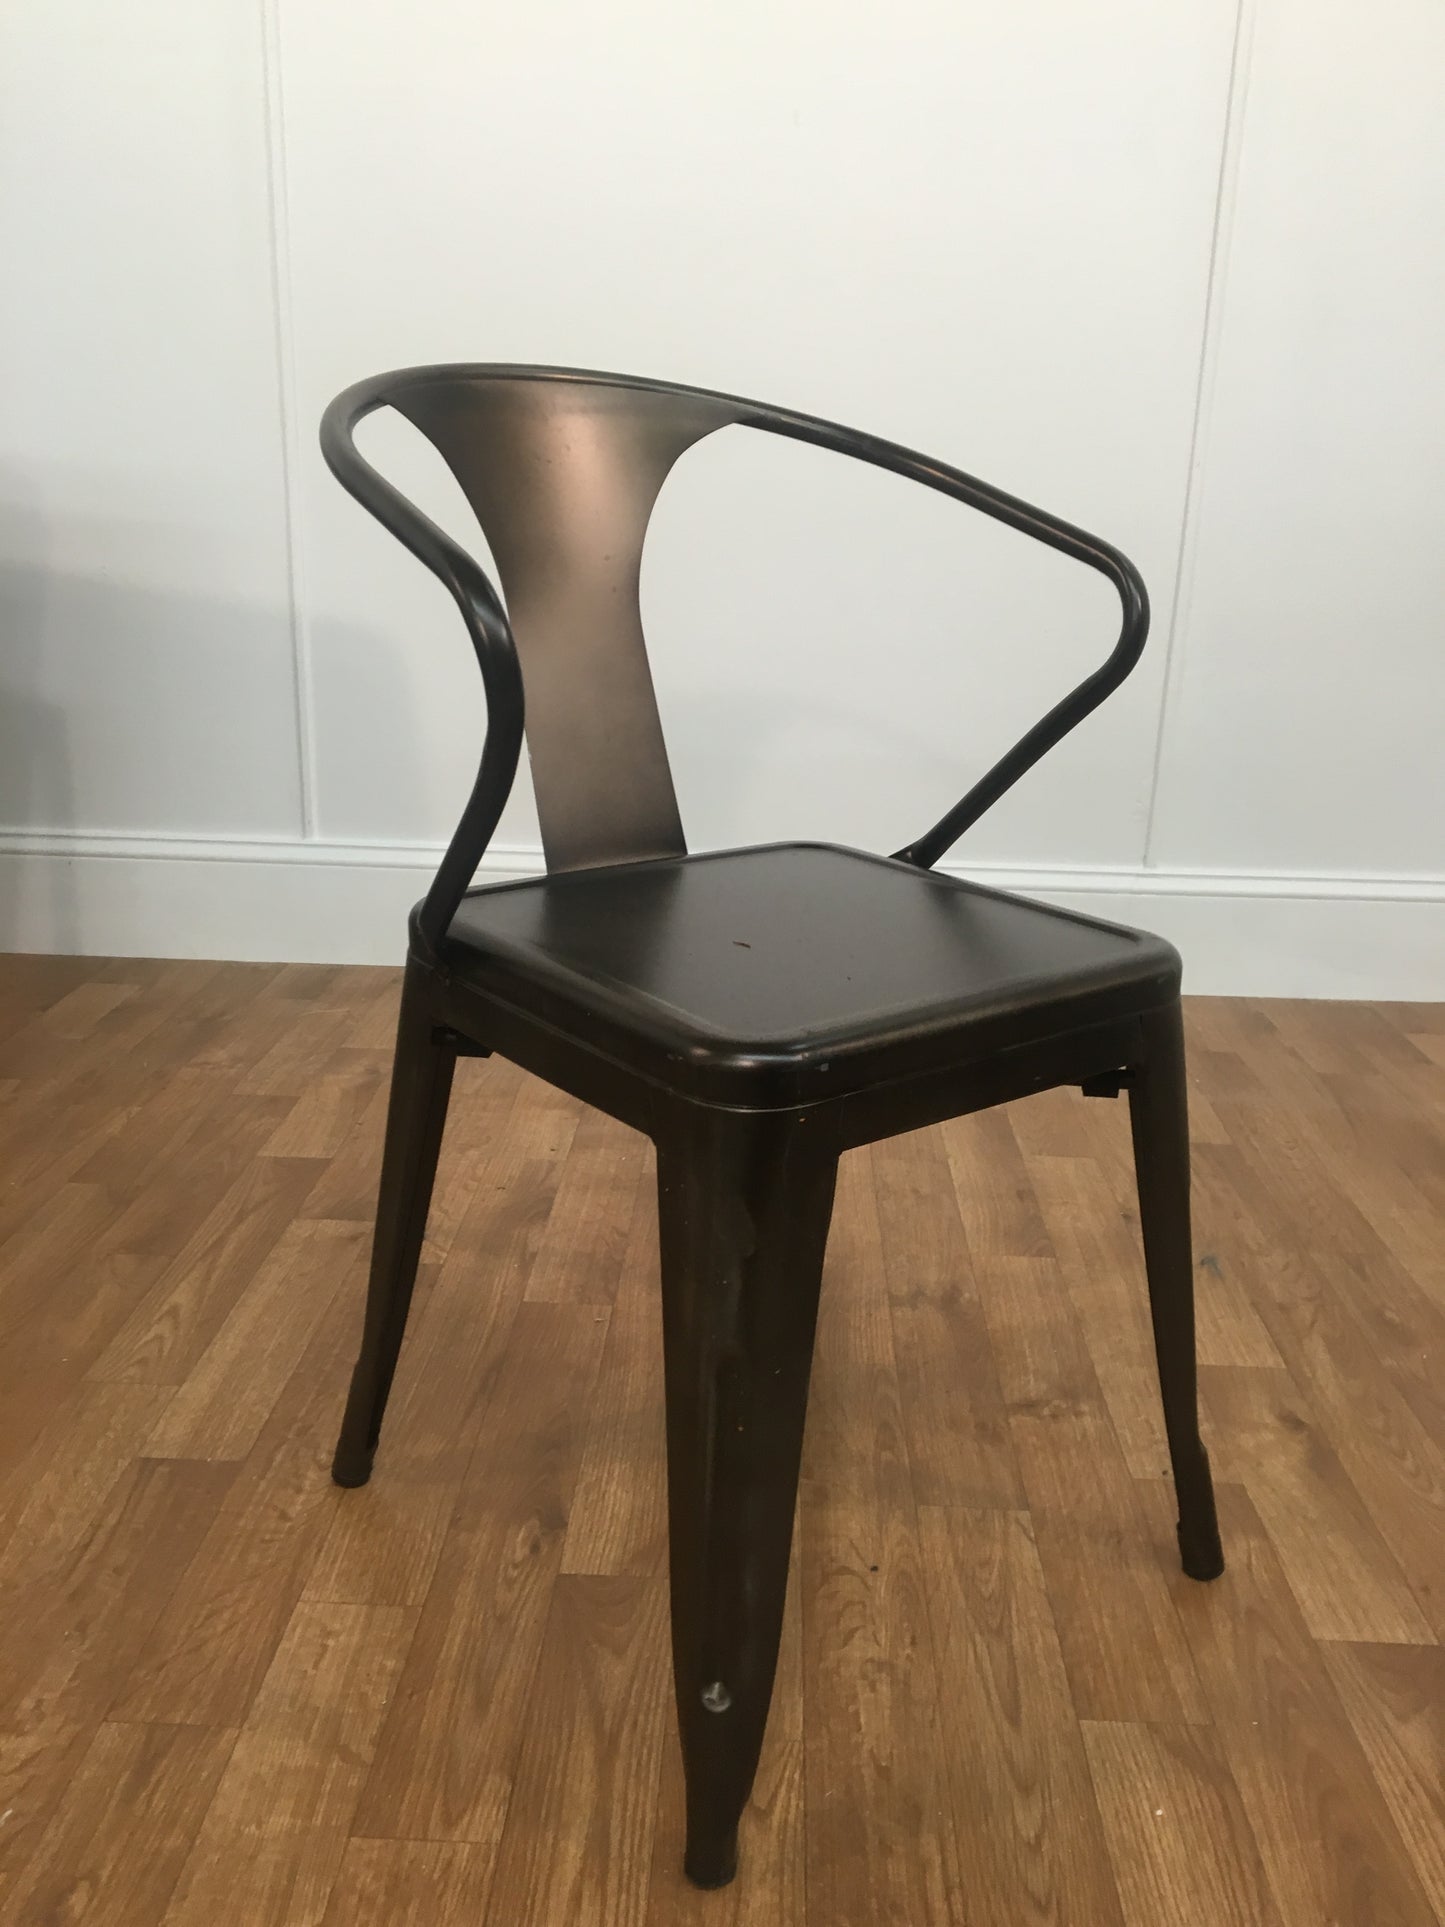 BRONZE CHAIR WITH OPEN BACK AND ARMS